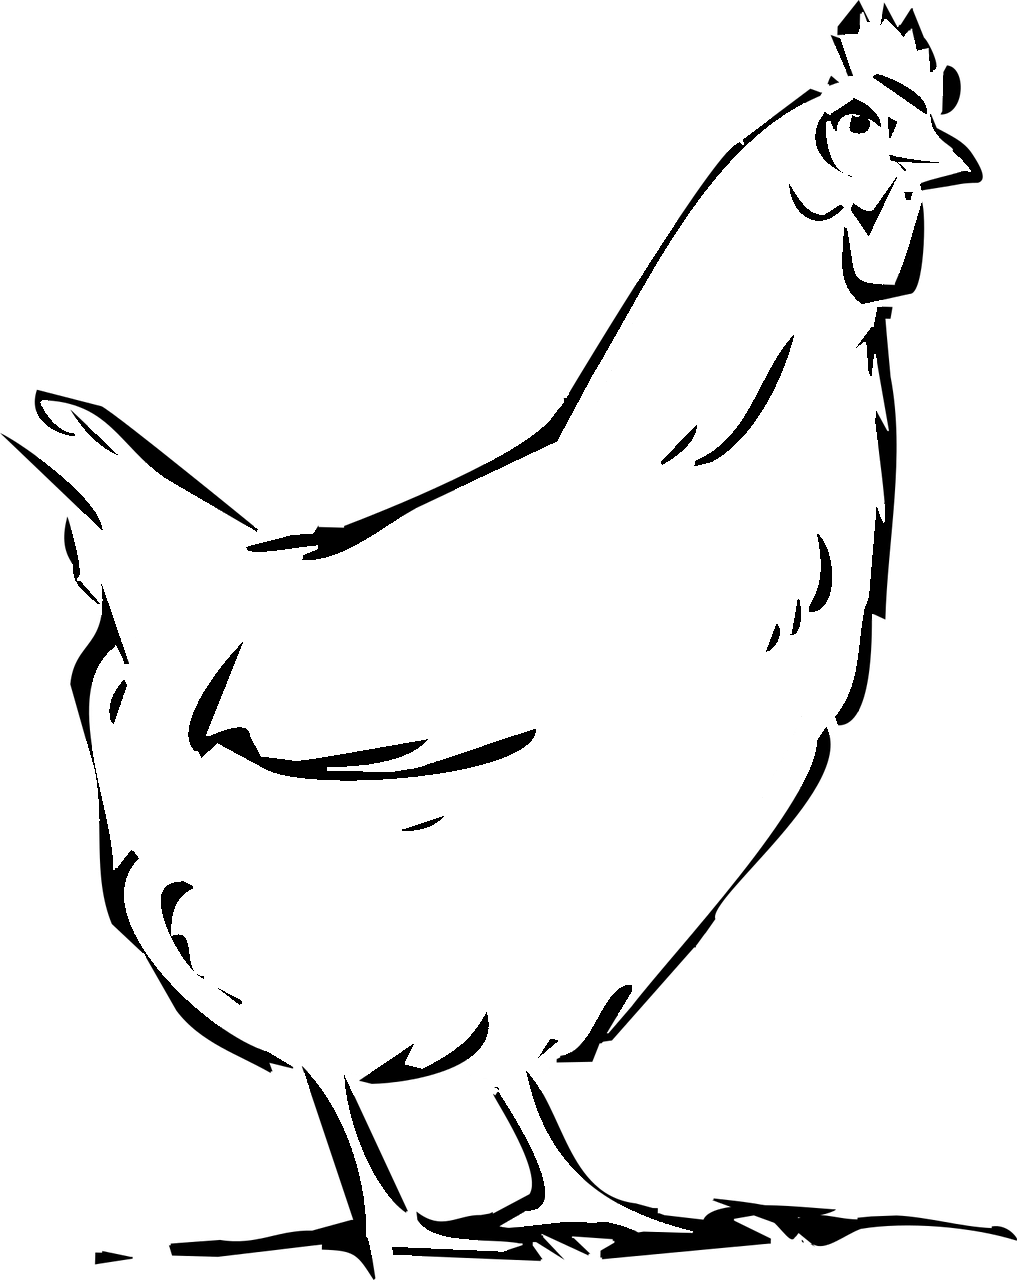 Coloring page of a hen